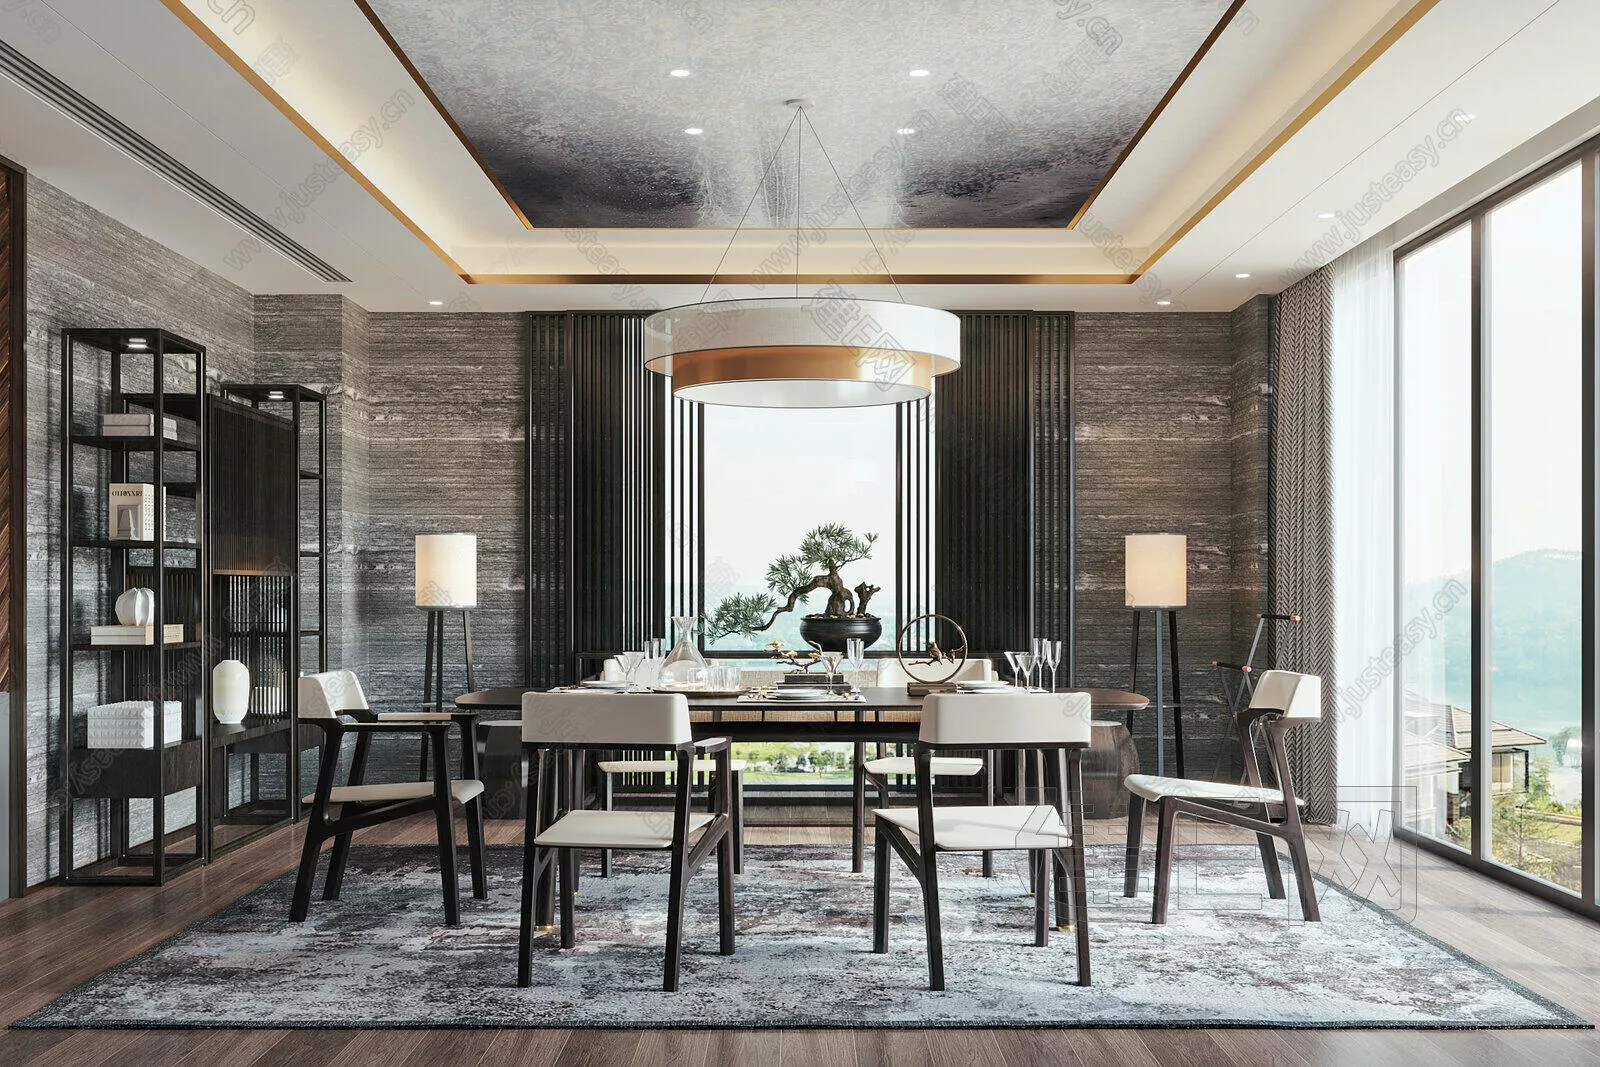 CHINESE DINING ROOM - SKETCHUP 3D SCENE - ENSCAPE - 106121467